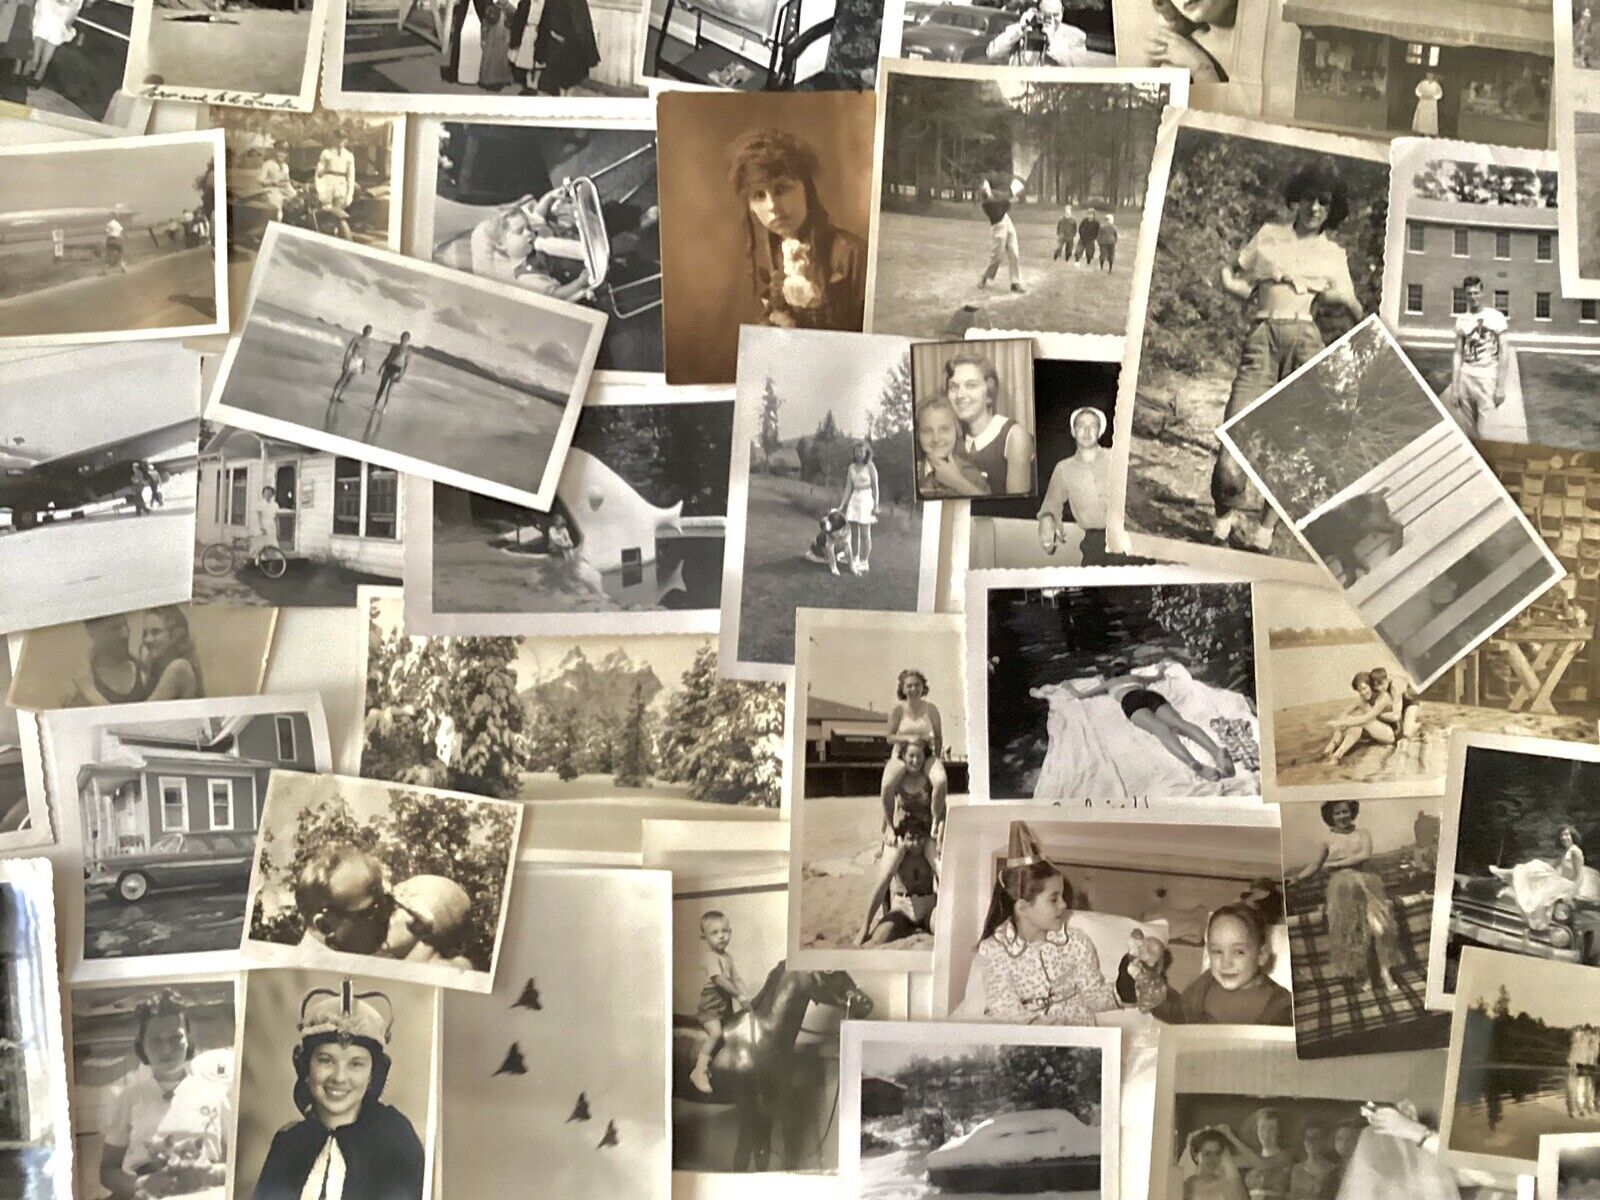 Lot Of 50 GREAT FOUND Vintage B&W Photographs Snapshots Antique Variety Booth